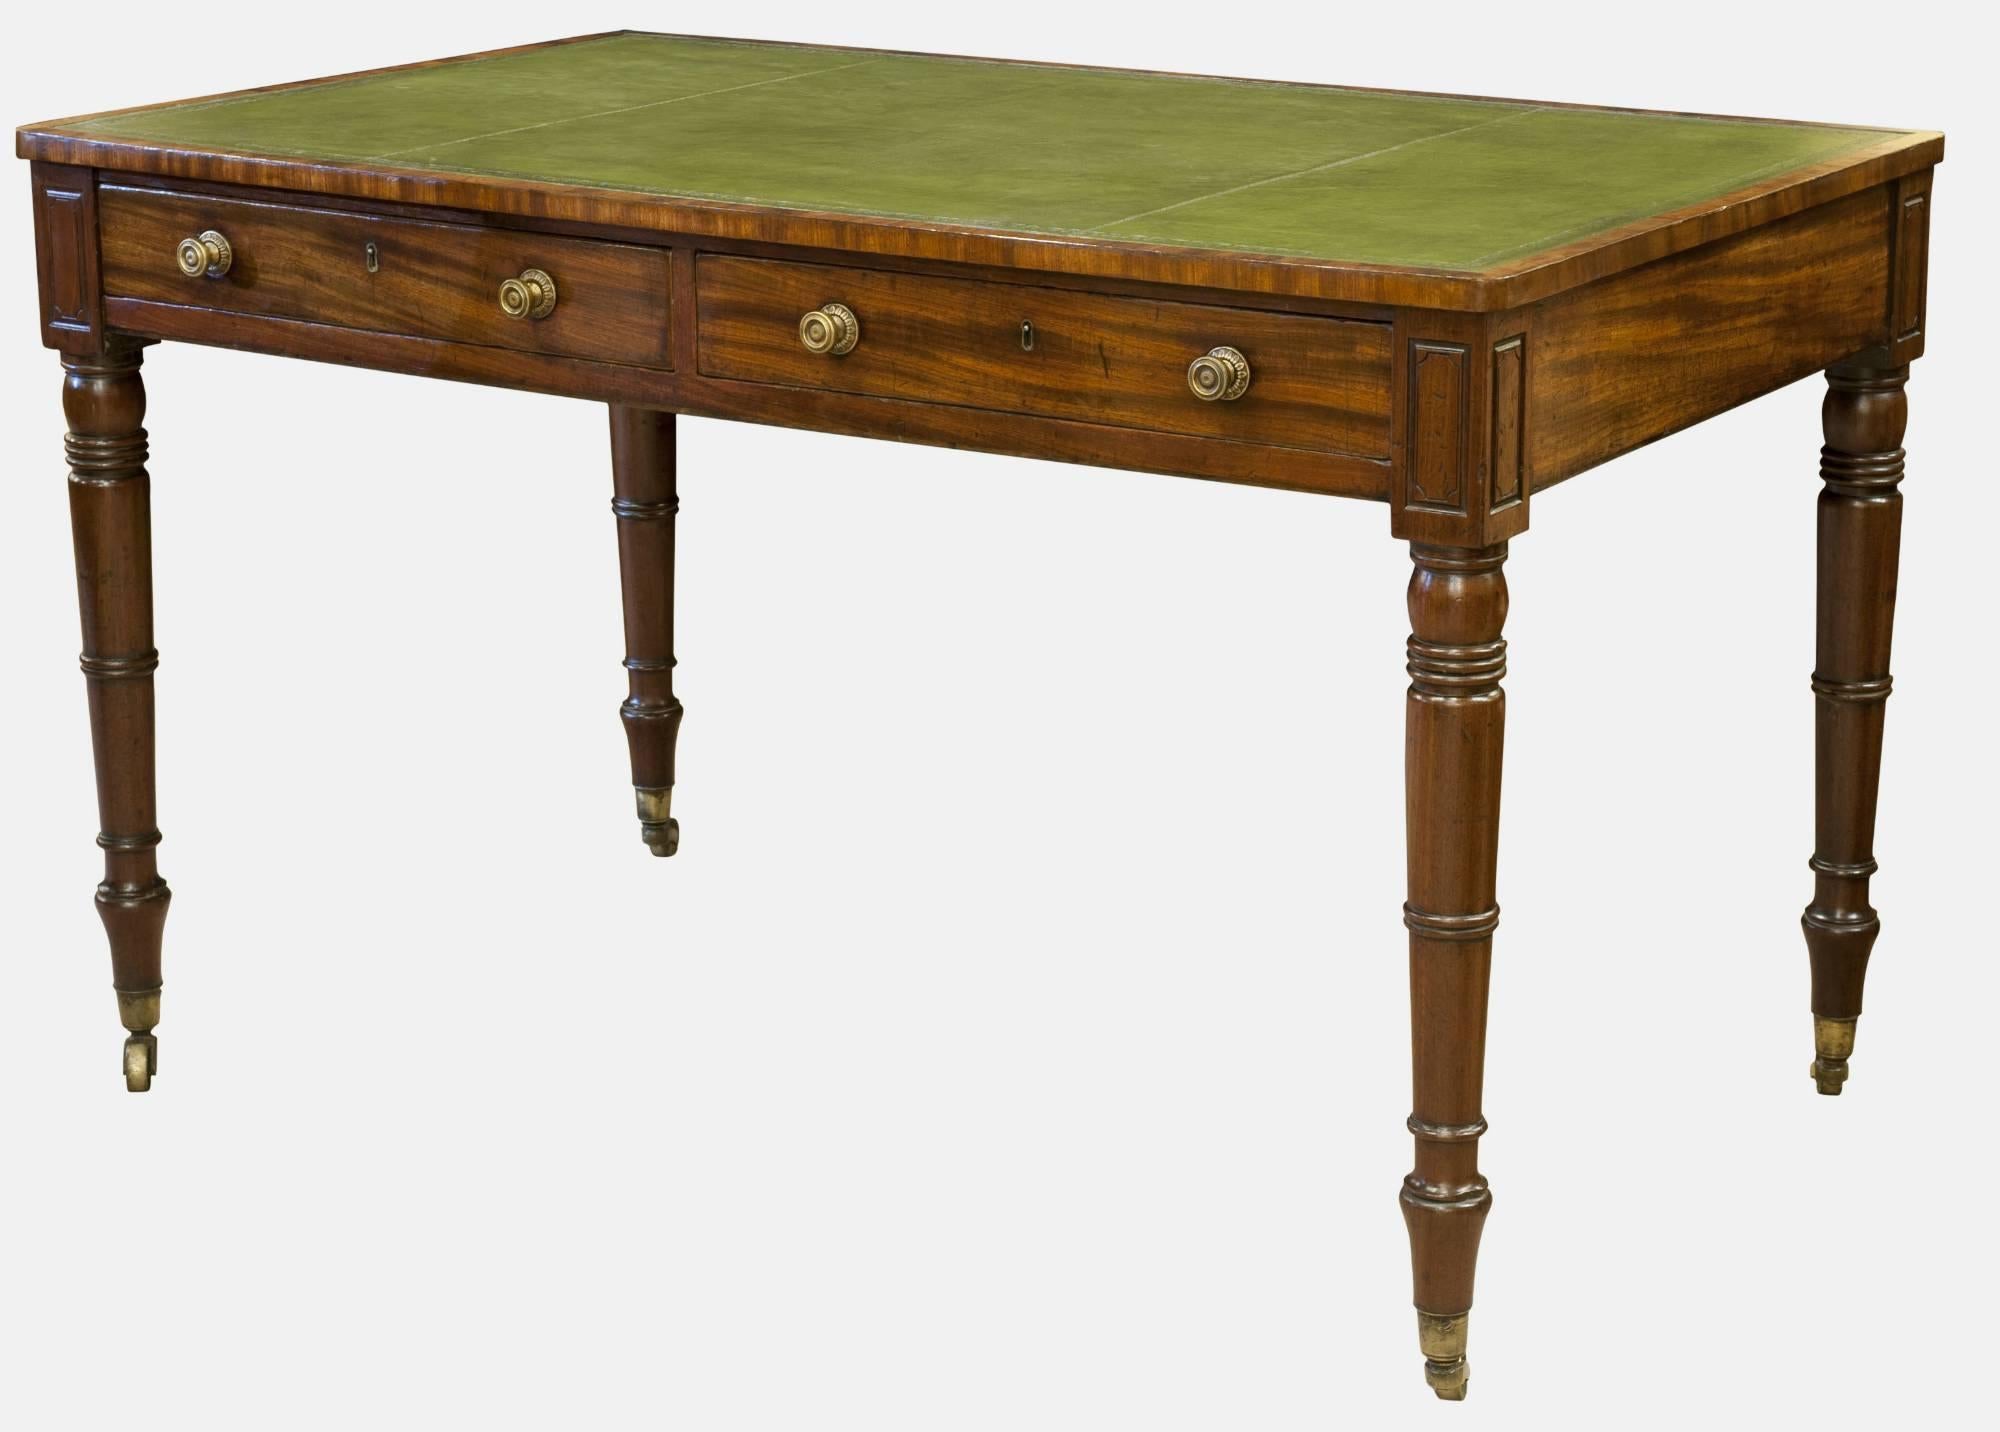 A good Regency mahogany library table having a green leather insert and two deep drawers (dummied on reverse). Raised on turned legs to original castors, circa 1810.